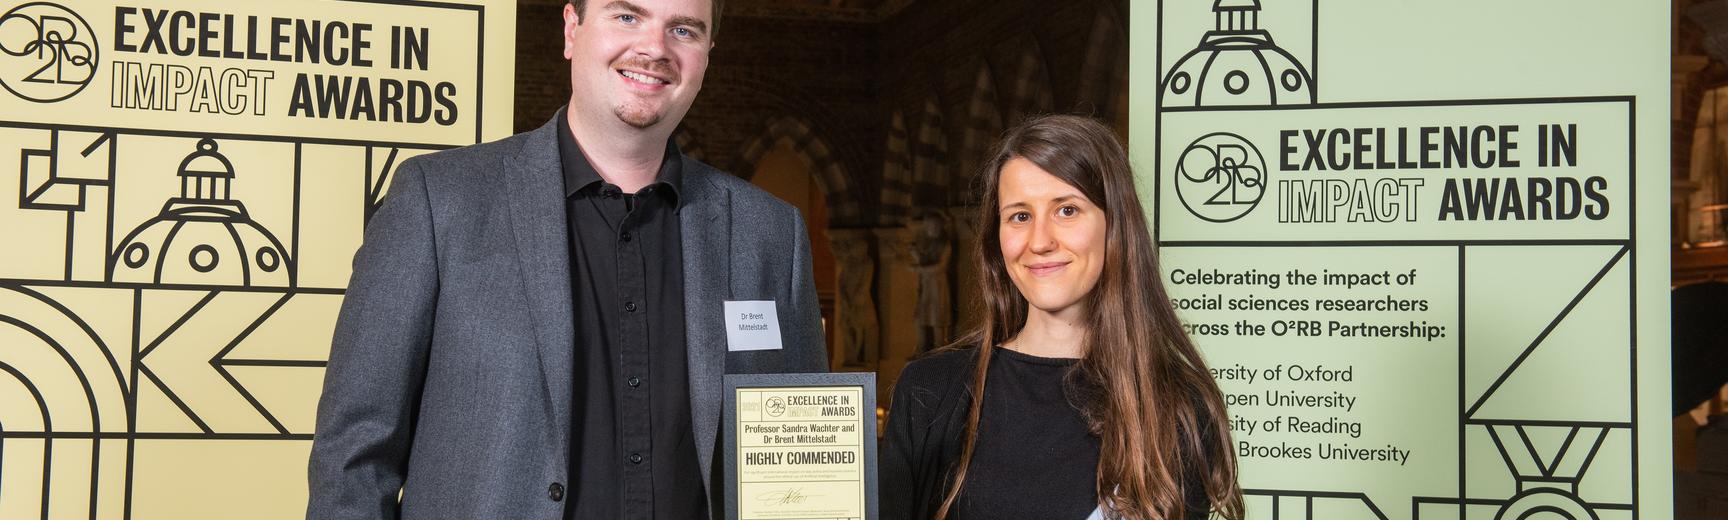 Professor Sandra Wachter and Dr Brent Mittelstadt hold their Highly Commended impact award, flanked by event branding at the awards reception